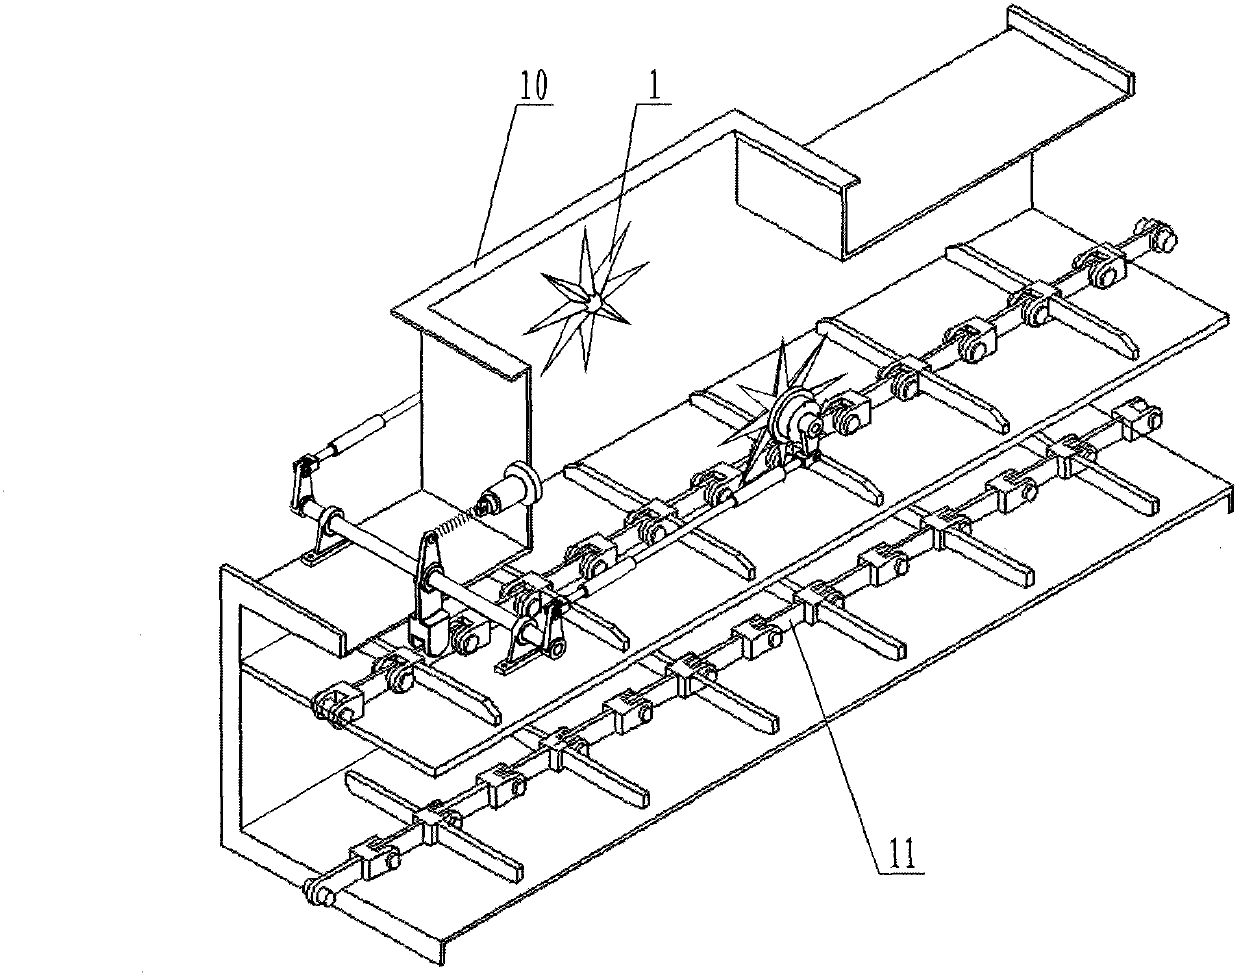 Conveyor synchronous cleaning device